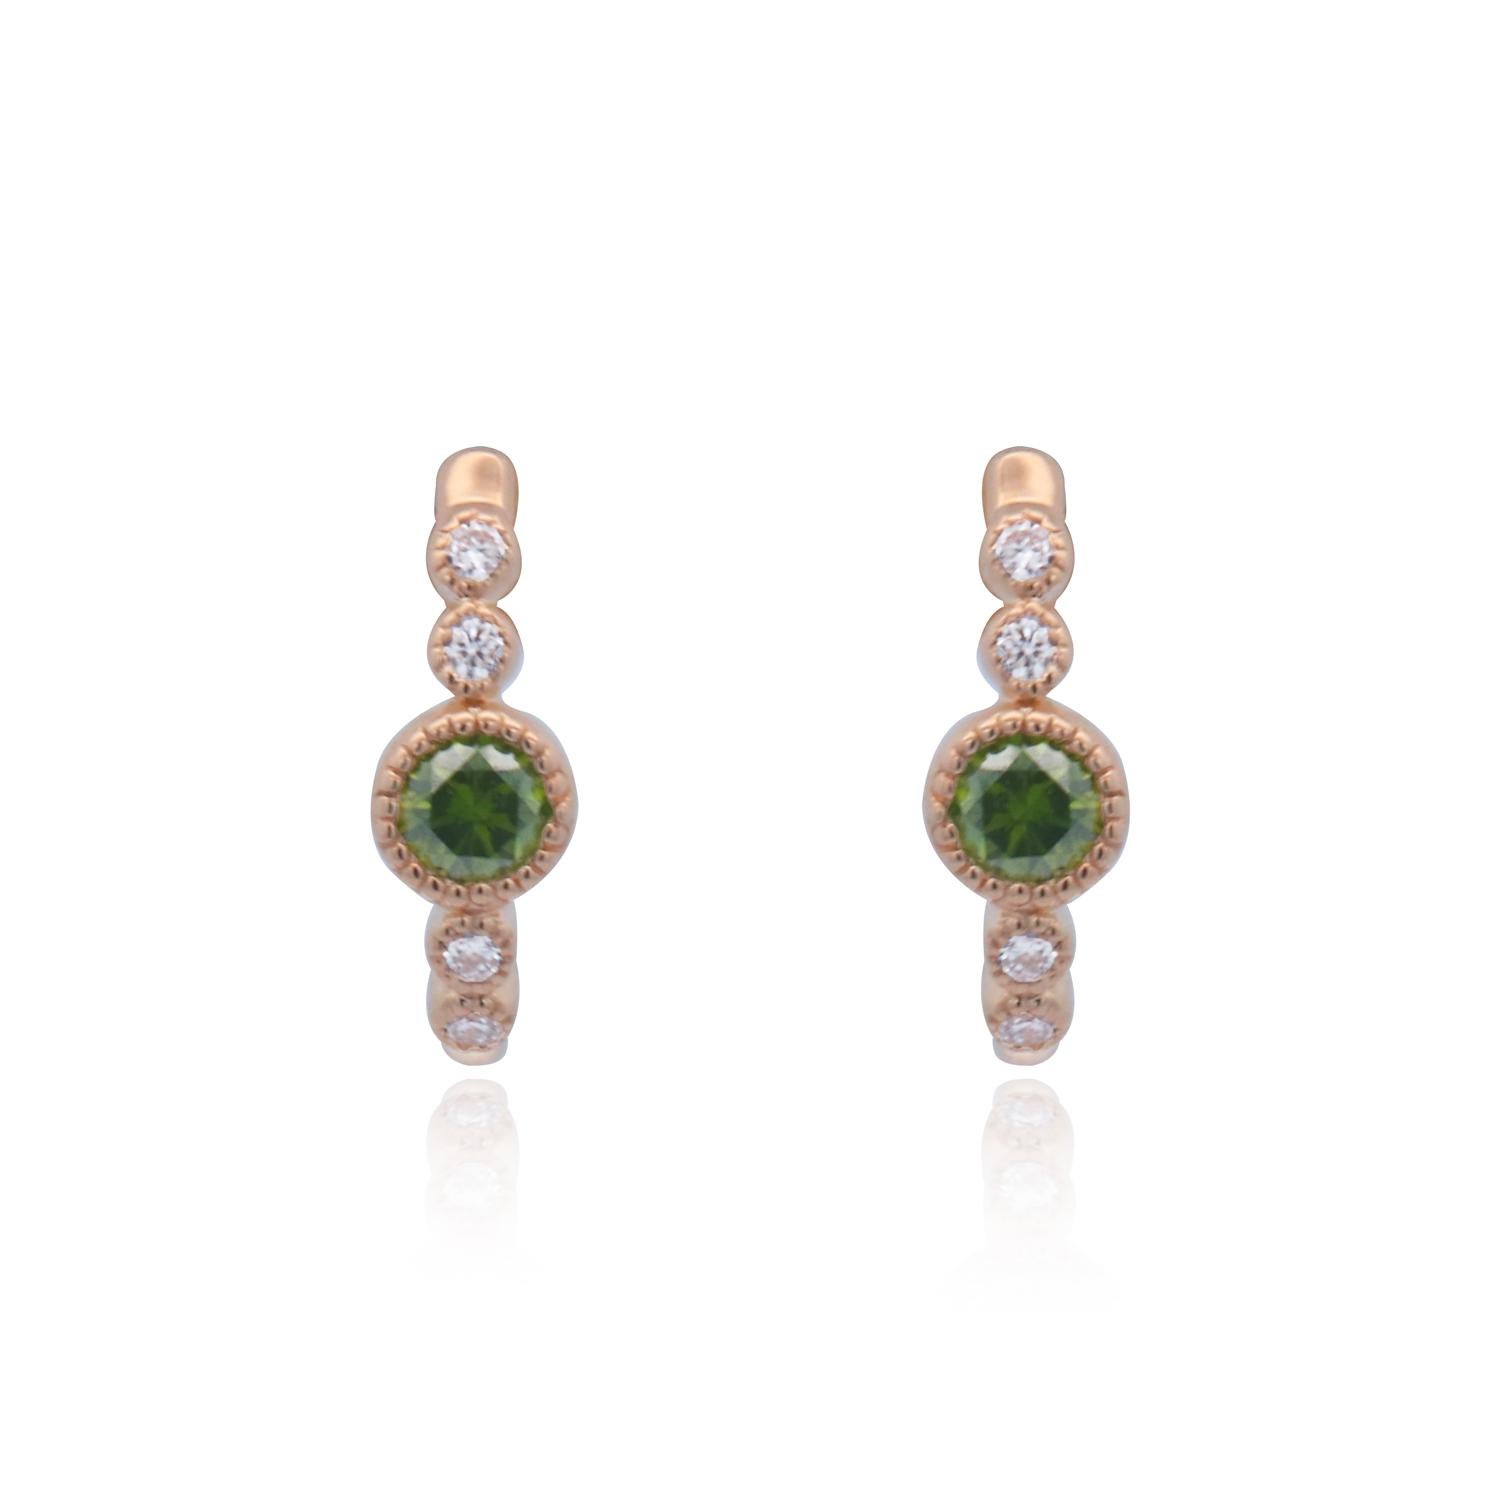 Material: 14K Yellow Gold 
Stone Details: 2 Green Diamonds Diamonds at 0.50 Carats Total Weight
0.15 Carats Total Weight of 8 Round Brilliant Diamonds
Clarity: SI / Color: H-I

Fine one-of-a-kind craftsmanship meets incredible quality in this